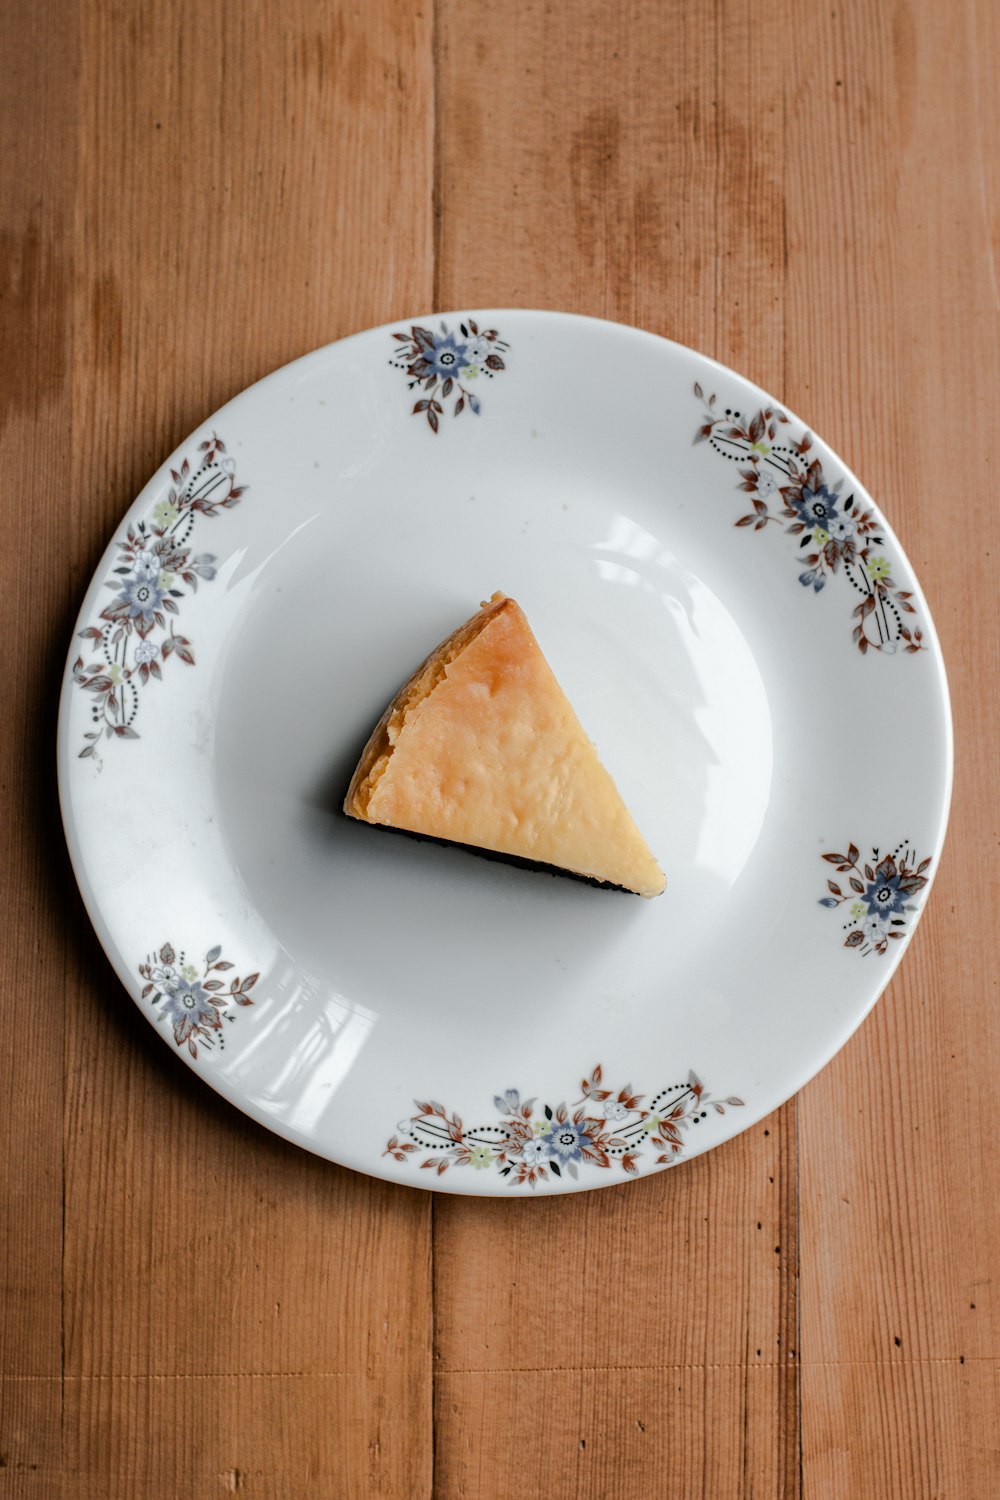 a piece of pie on a plate on a wooden table